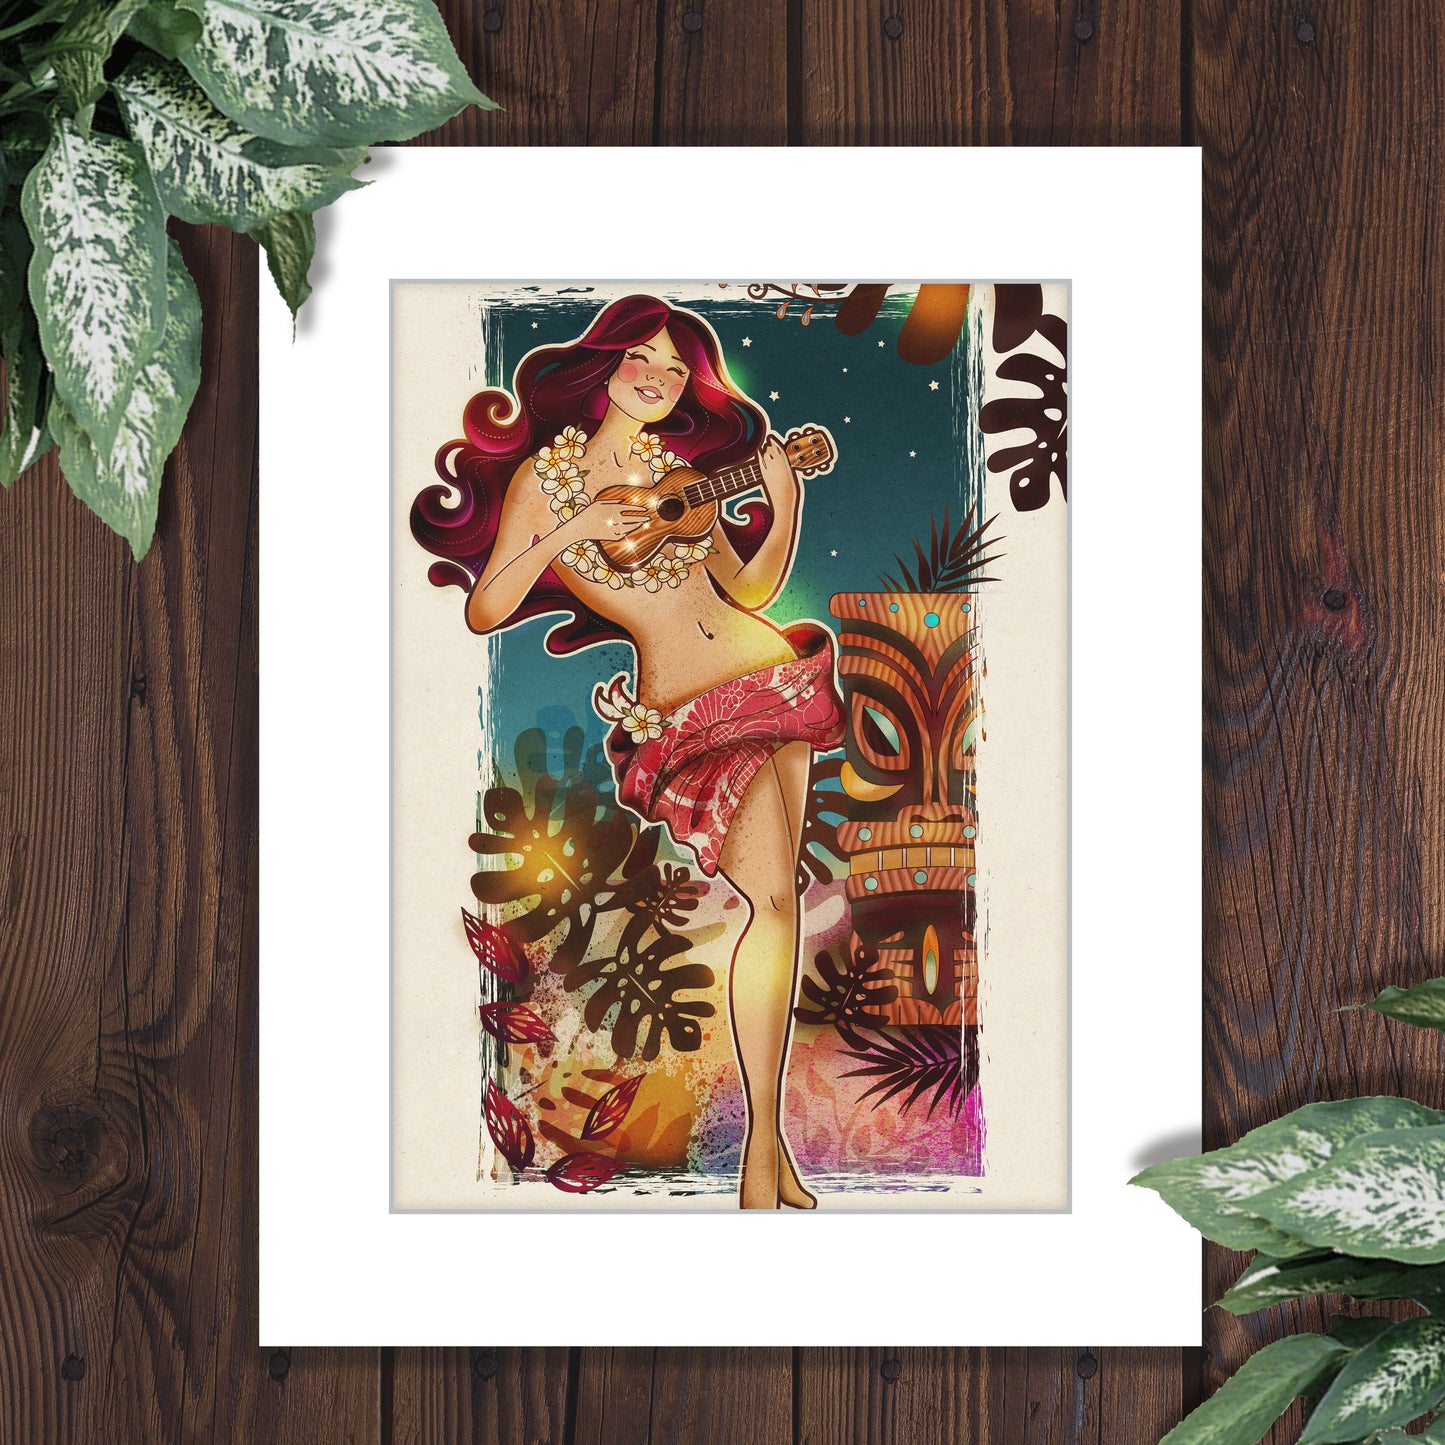 a tiki style illustration of a red haired hula girl playing the ukulele at night. She is framed by a tiki and abstract monstera leaves and a distressed white frame